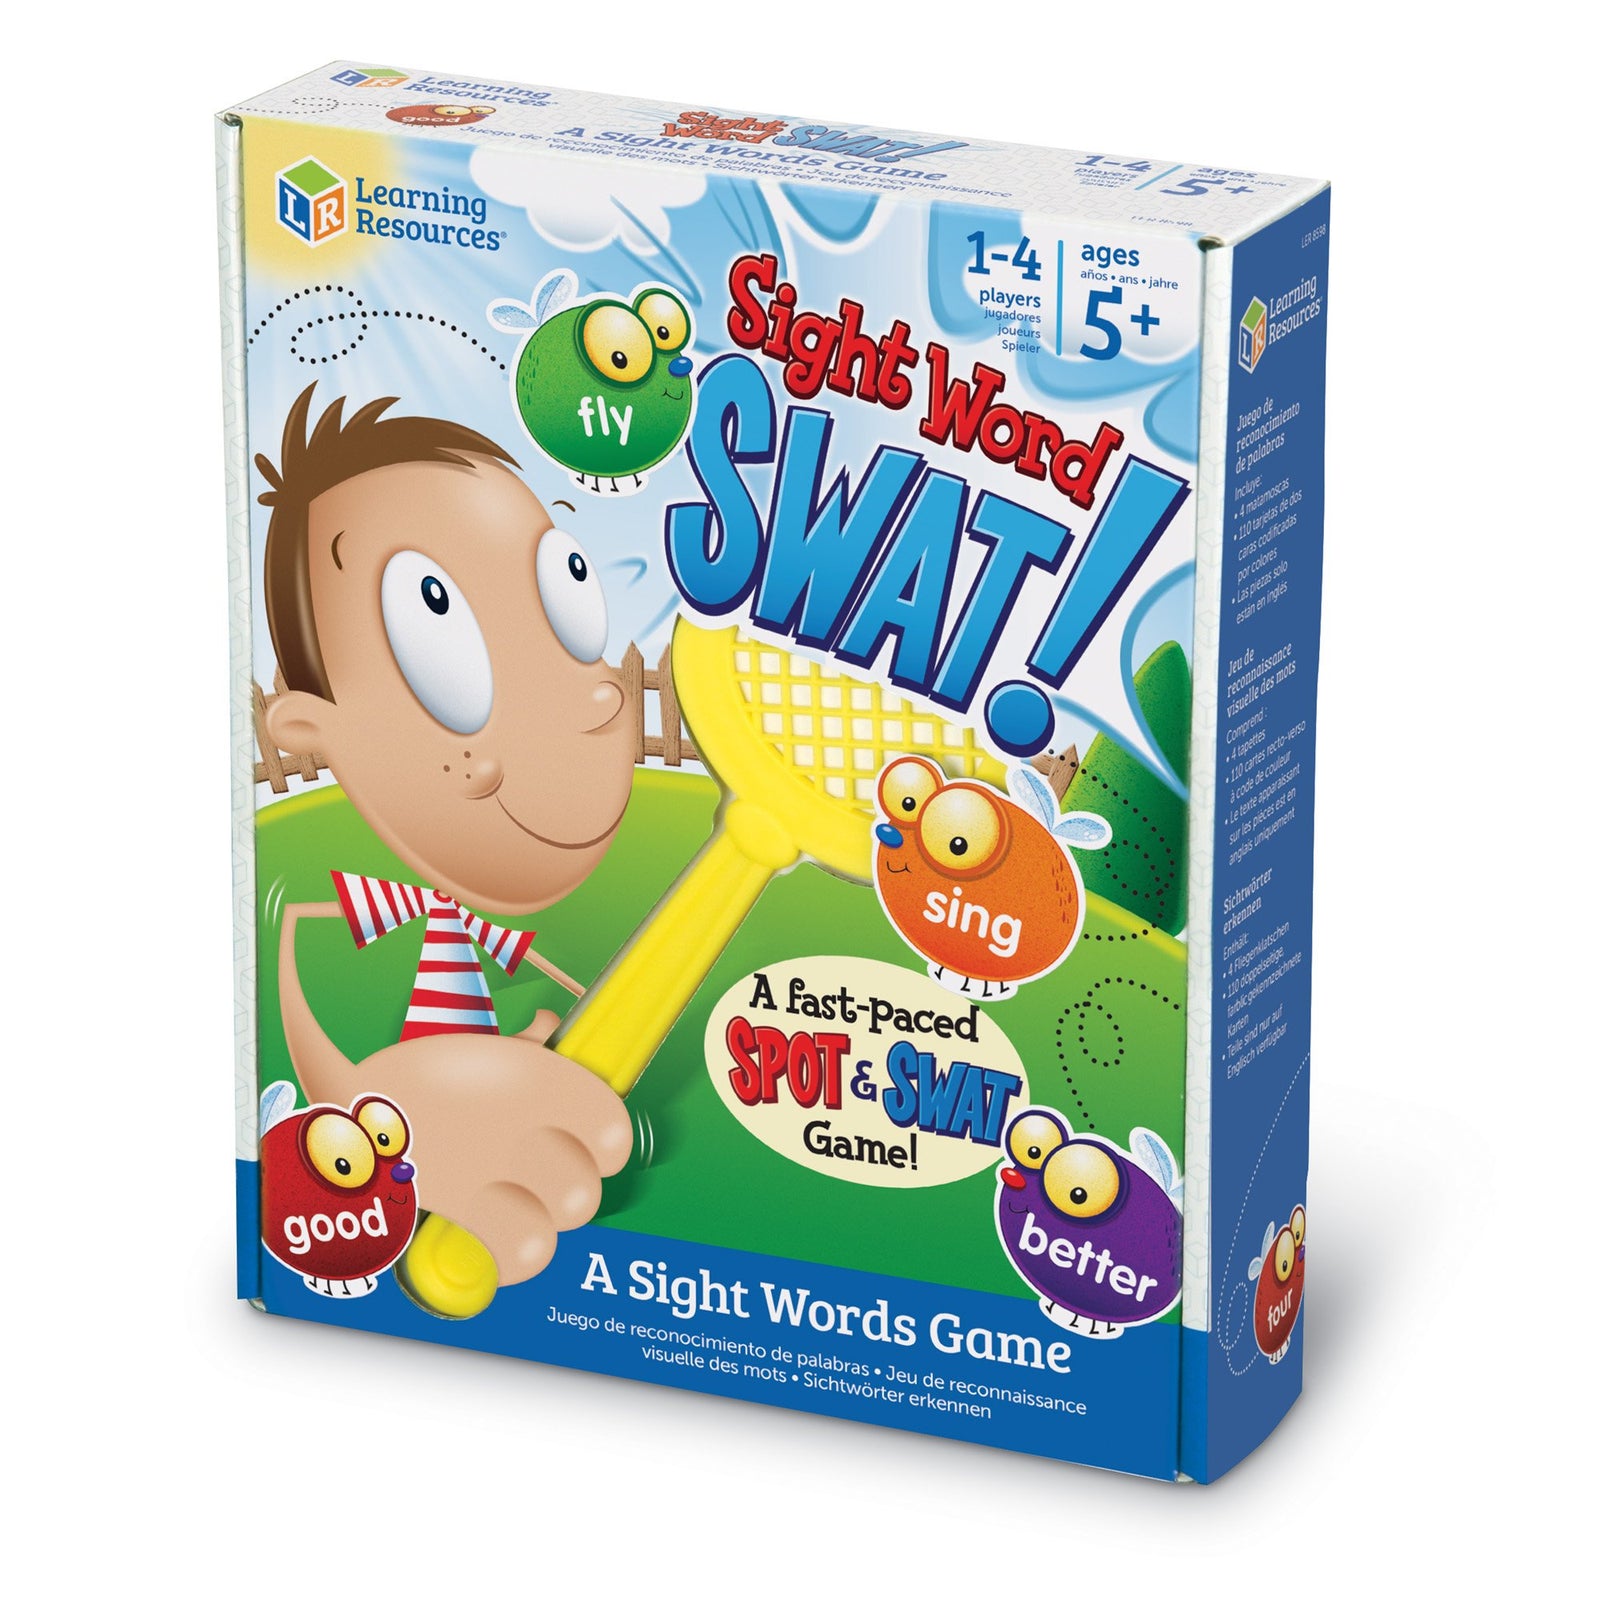 Learning Resources Sight Word Swat a Sight Word Game, Home School, Tactile and Auditory Learning, Phonics Games, Educational Toys for Kids, 114 Pieces, Ages 5+